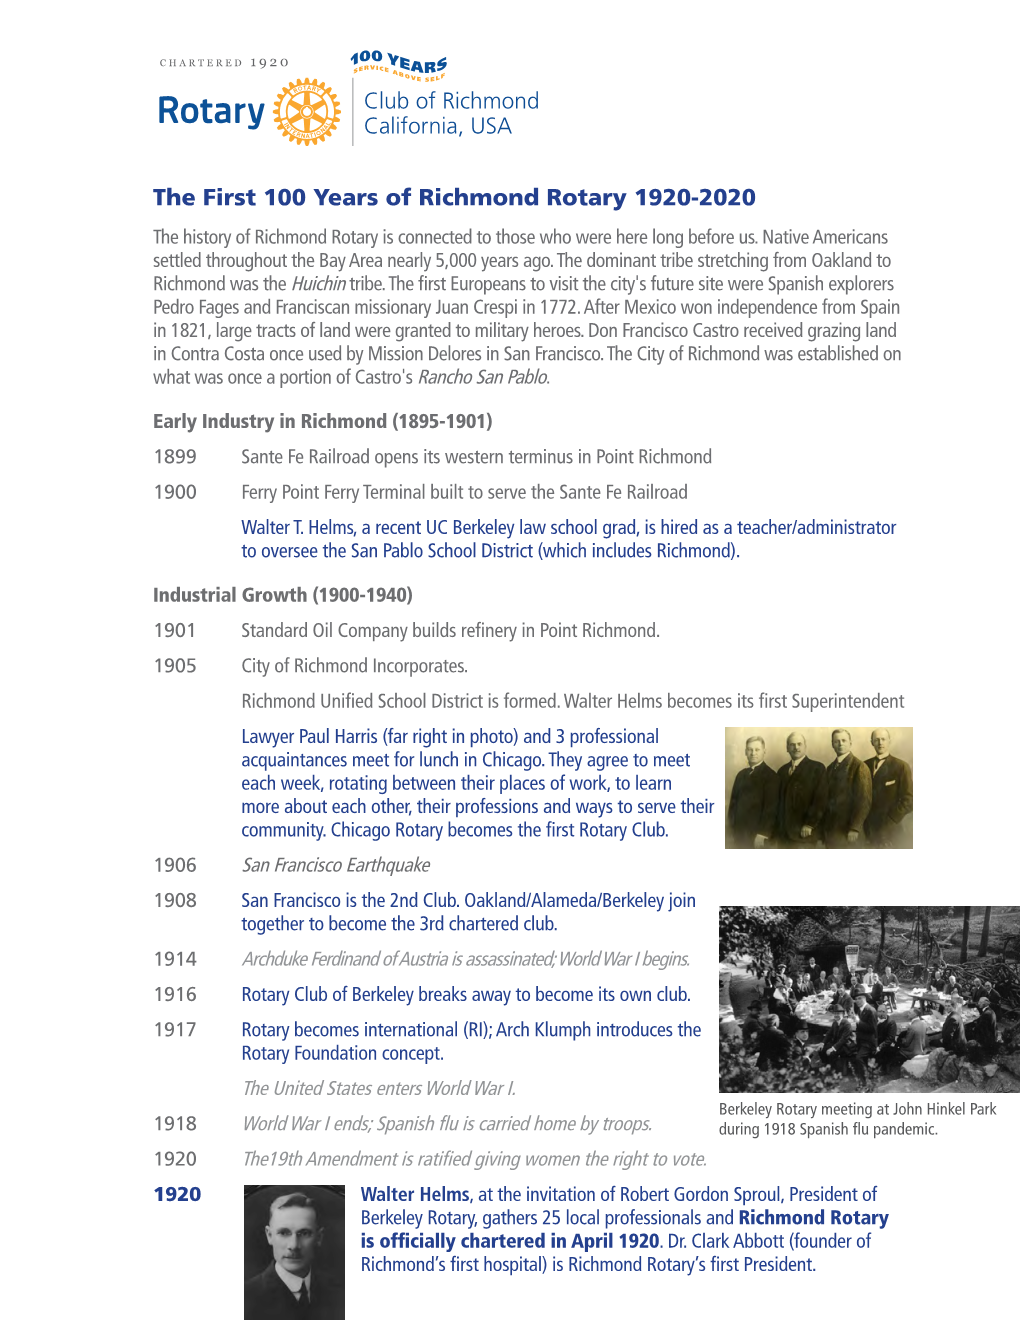 Timeline of the First 100 Years of the Richmond Rotary Club